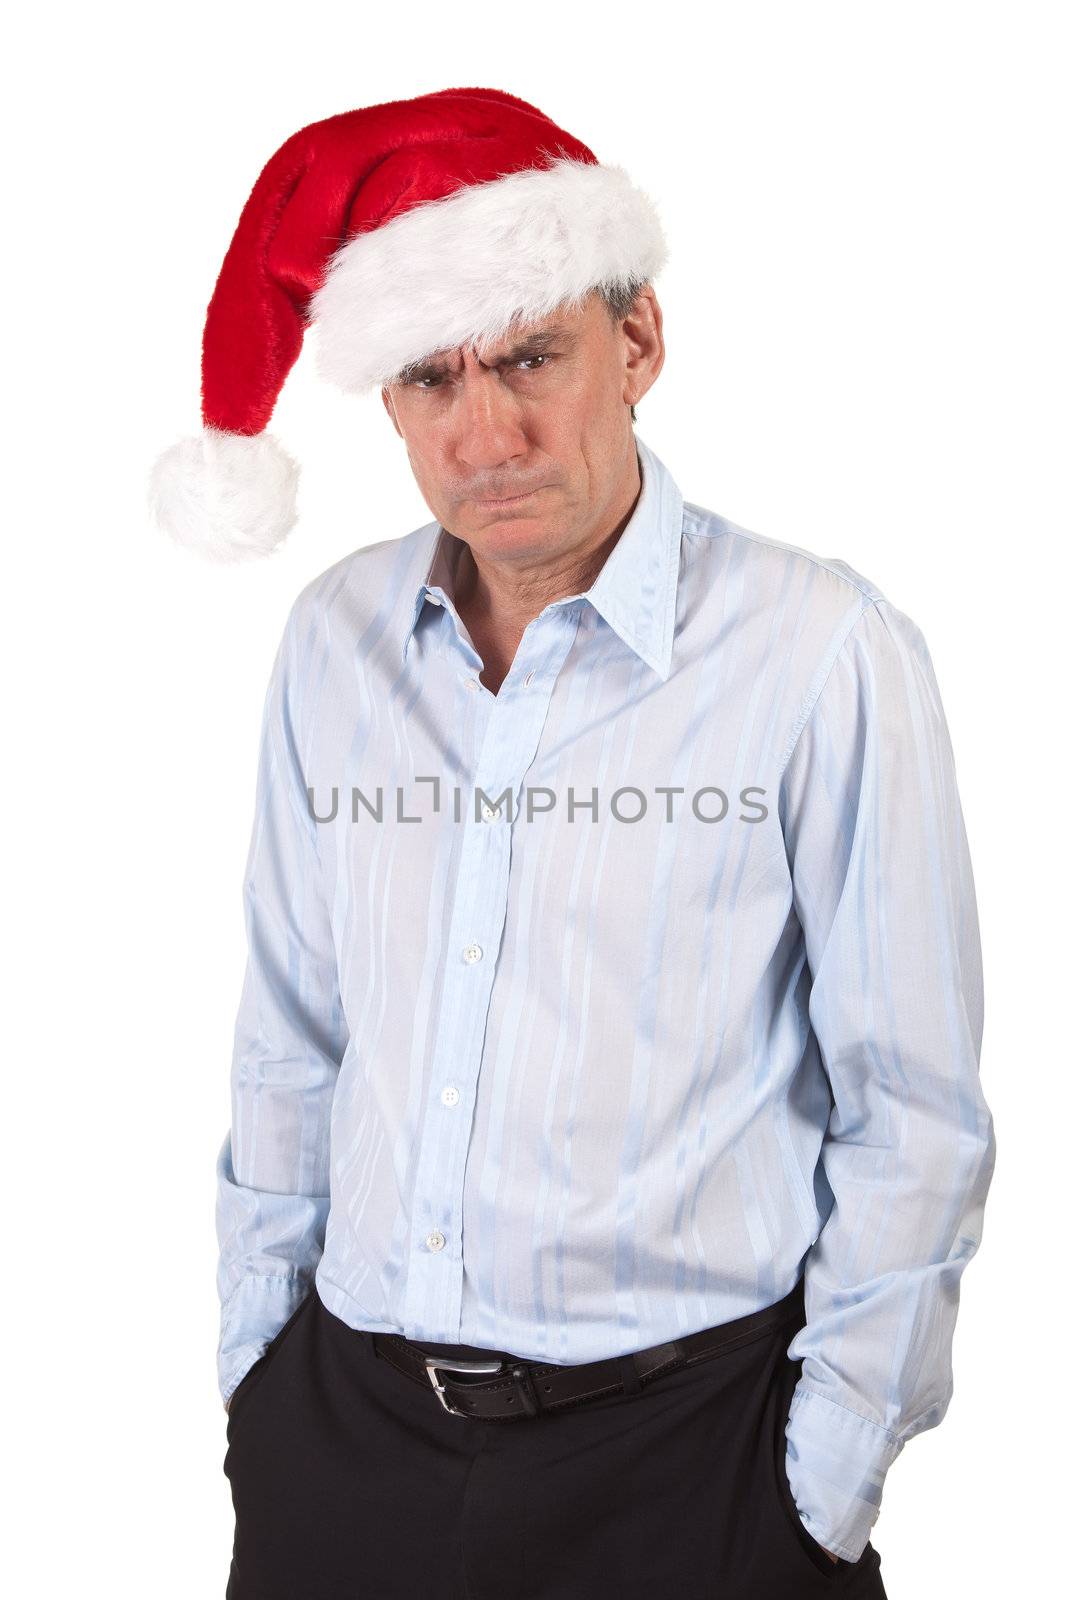 Grumpy Frowning Angry Business Man in Santa Hat by scheriton